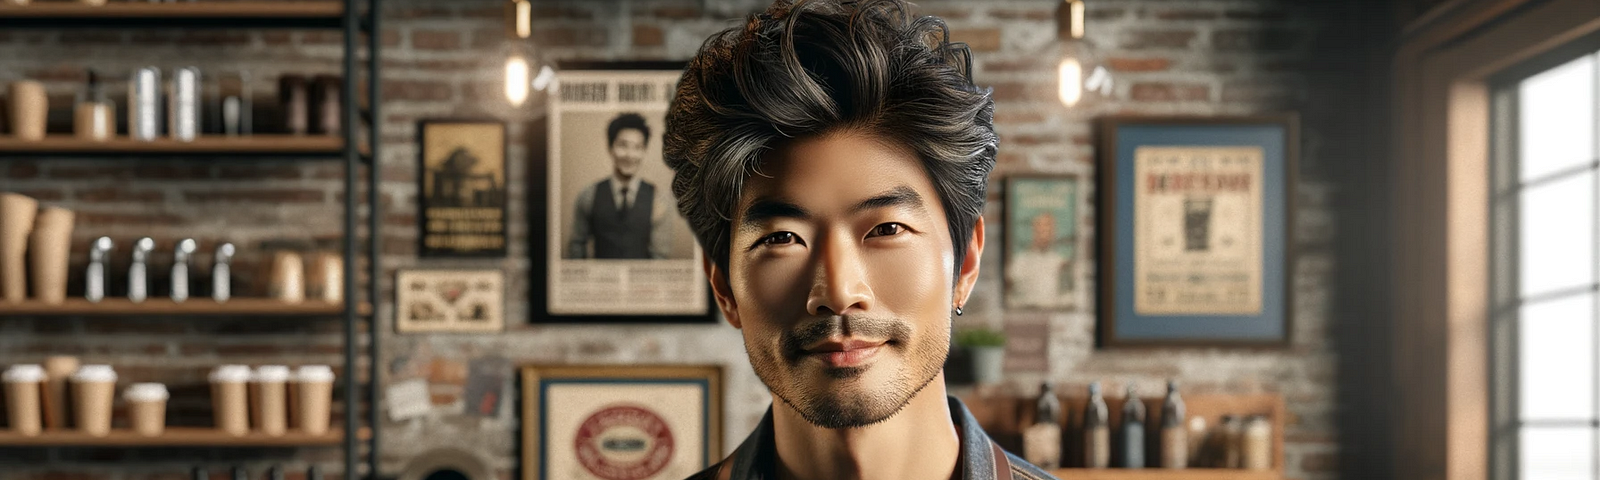 An image of Jason, an Asian American barista, standing in his cozy, eclectic coffee shop.